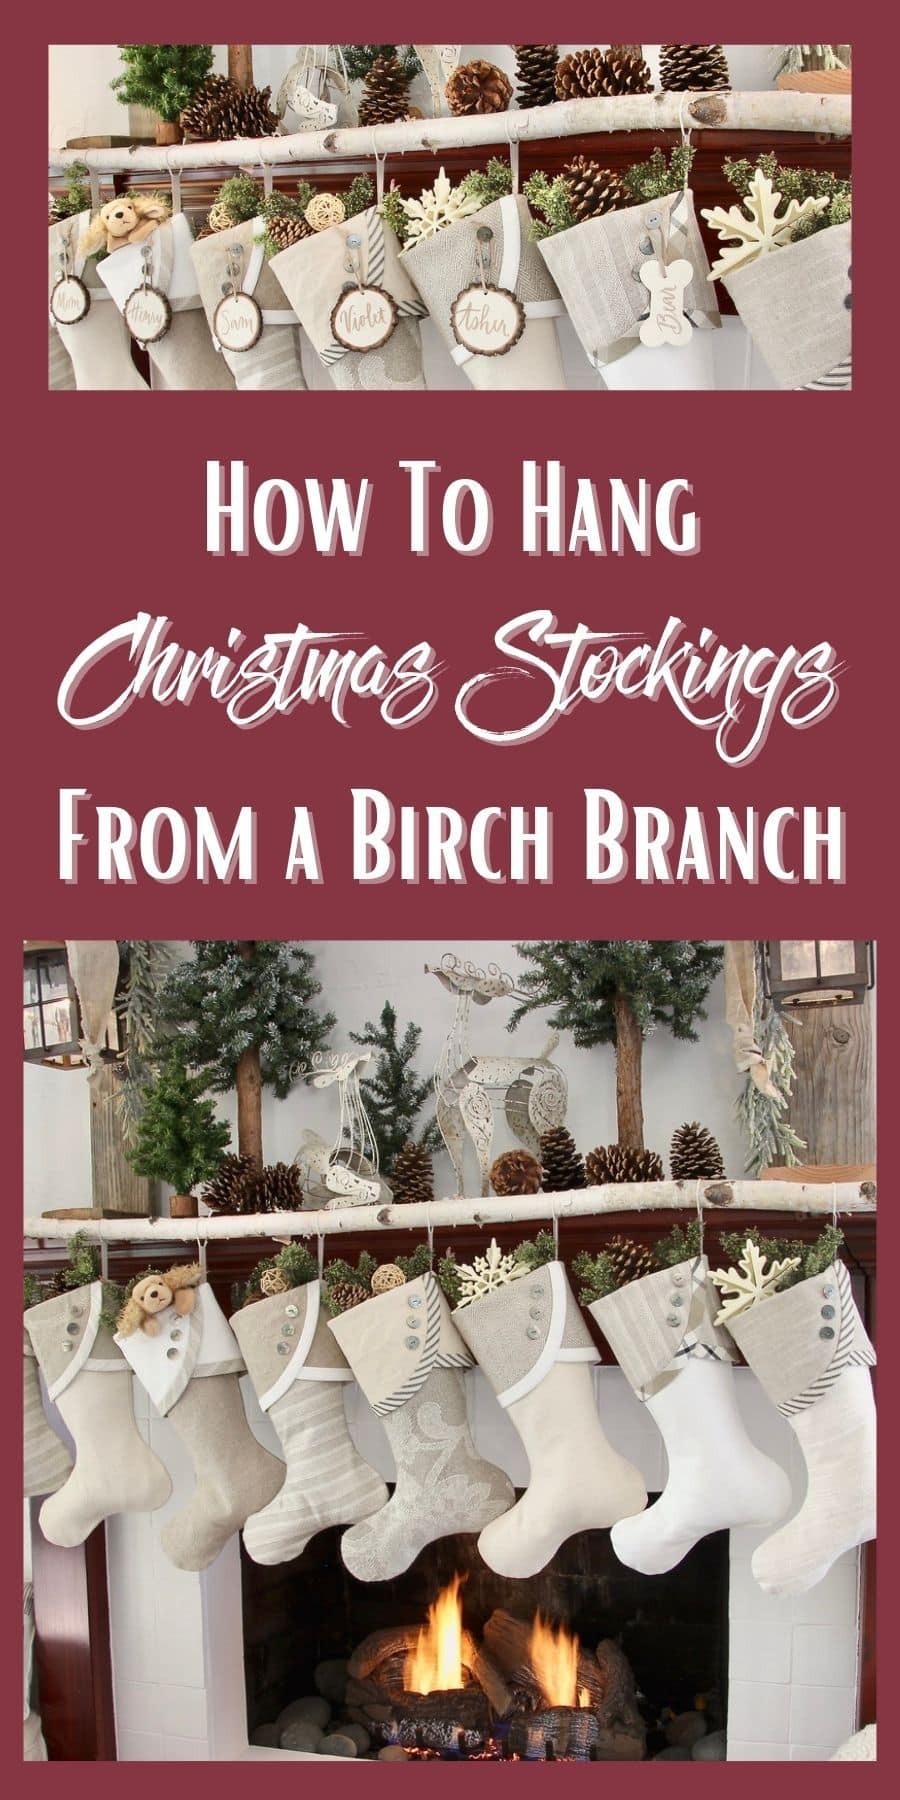 pinterest pin showing a closeup and a full image of 8 neutral farmhouse Christmas stocking with name tags hanging from a birch branch on a dark wood fireplace mantel 